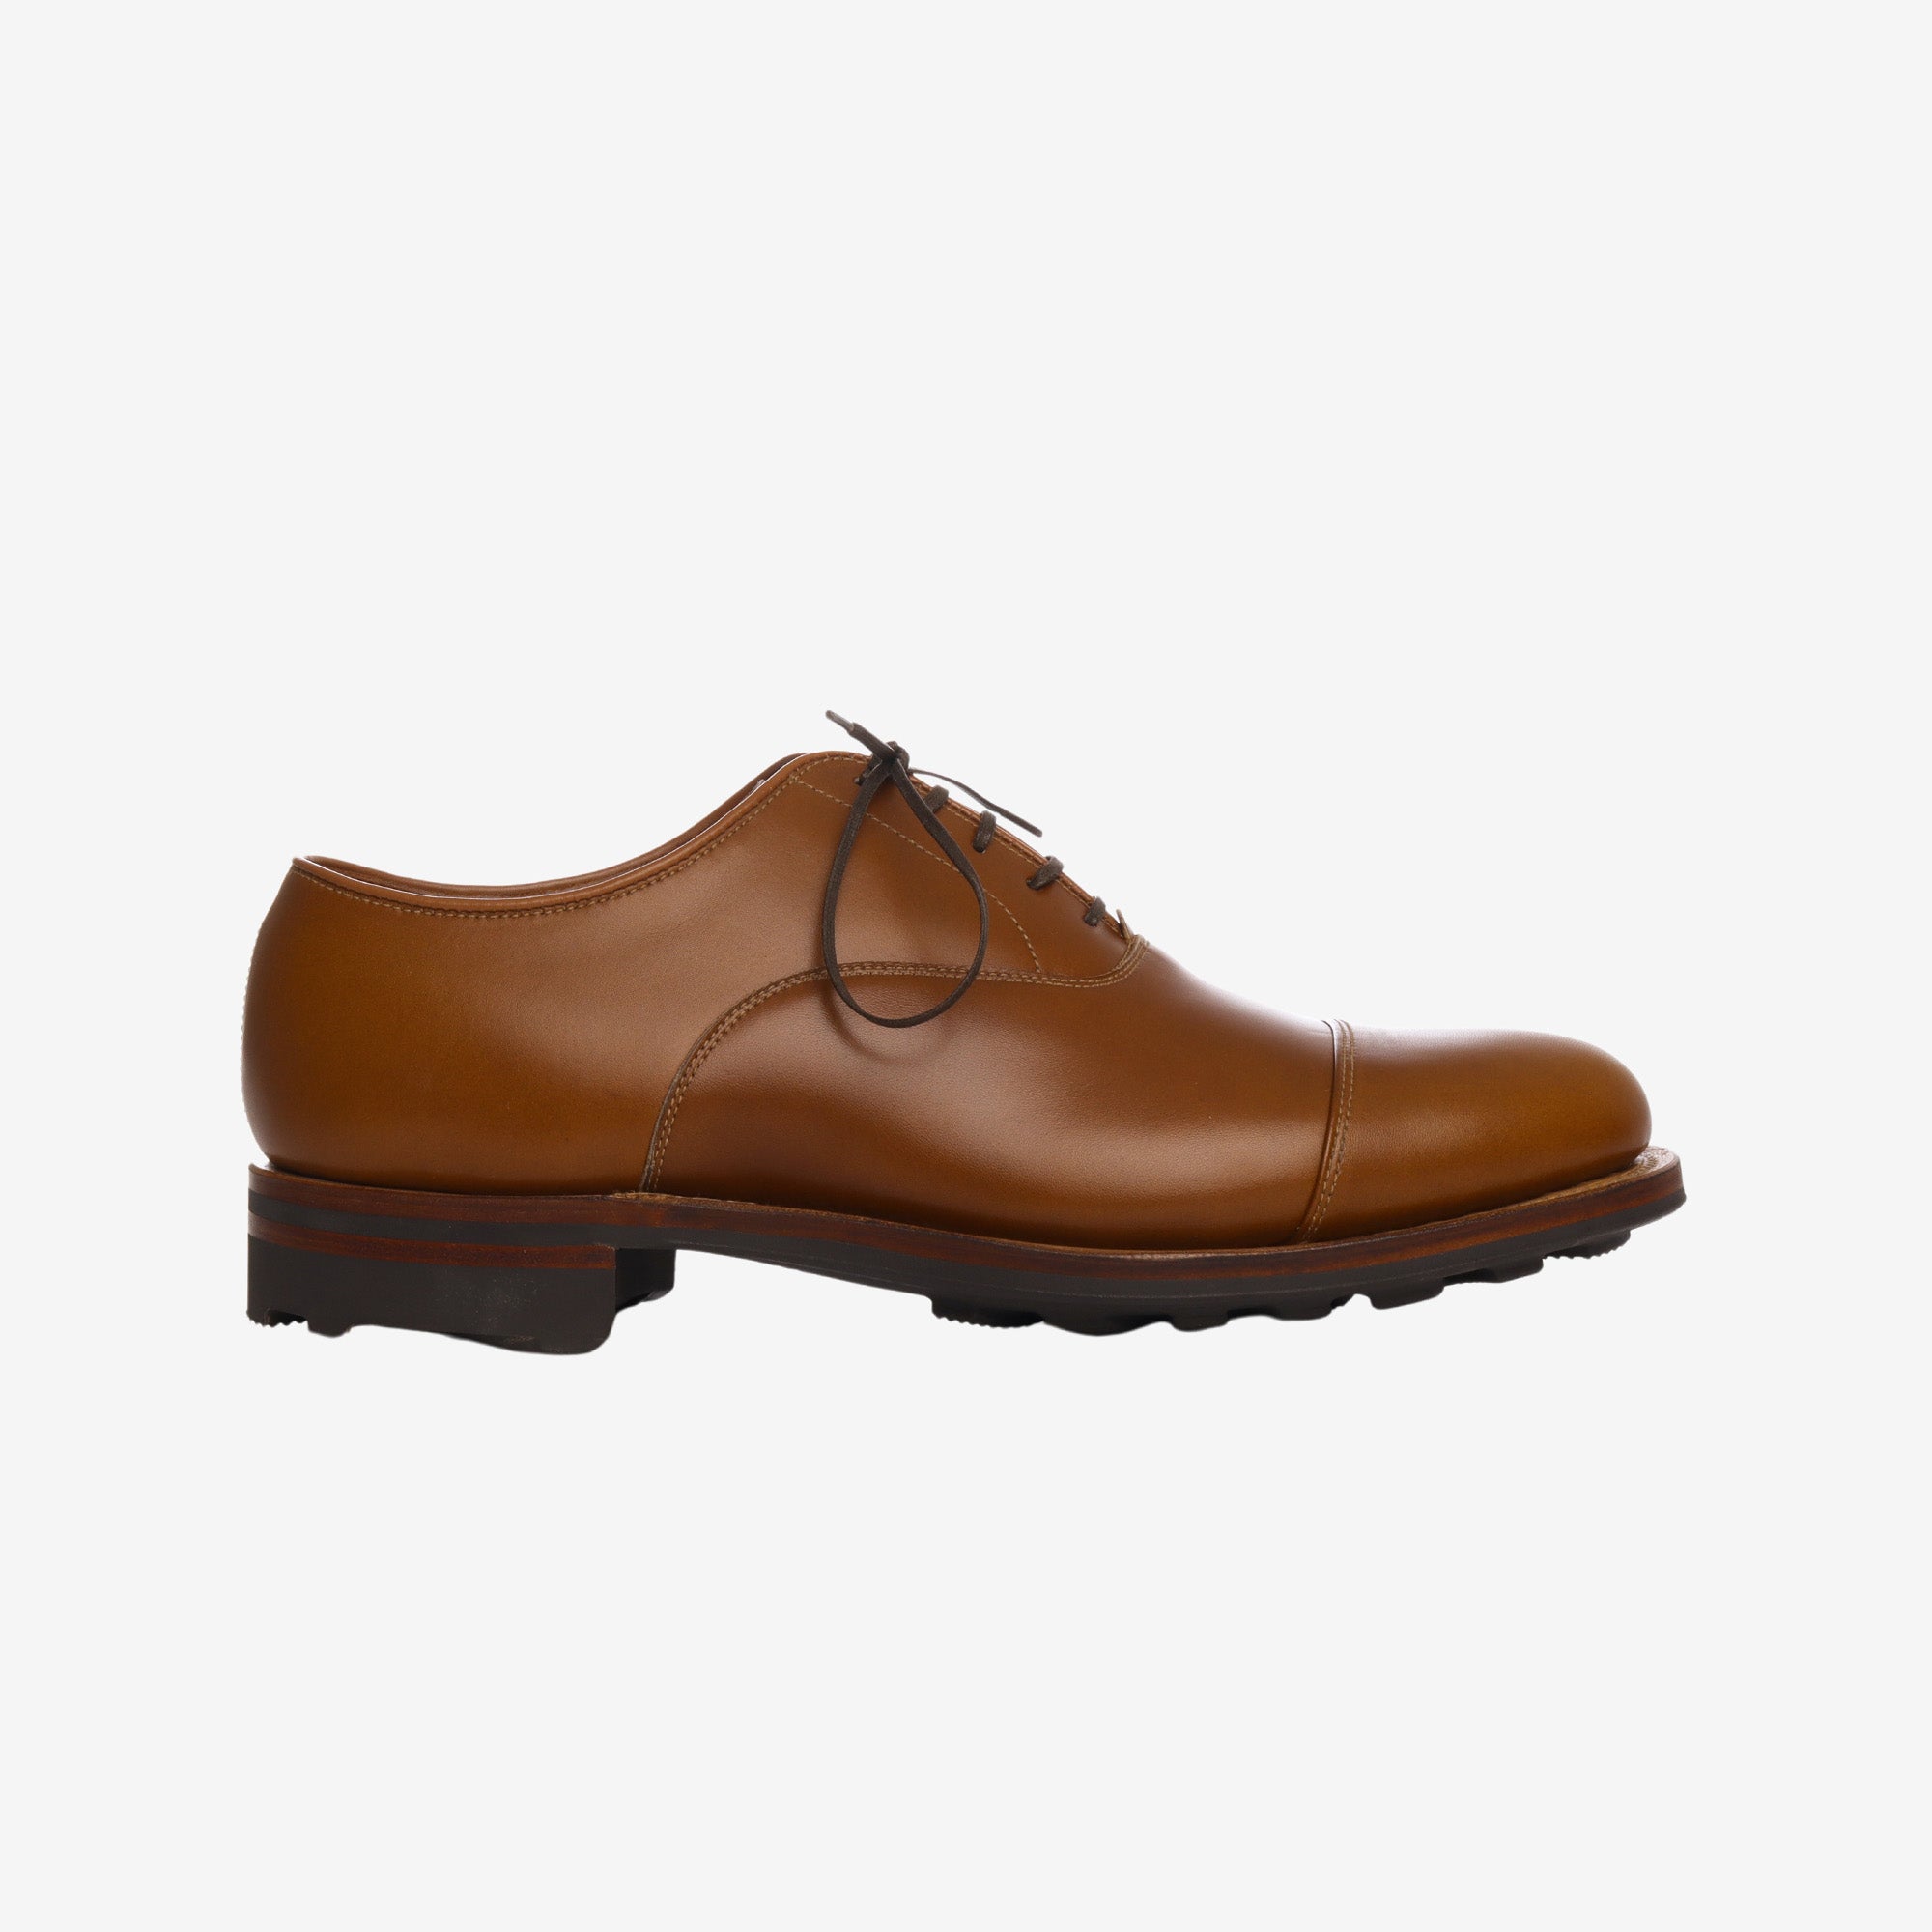 Bastion Oxford - Brown French Calf